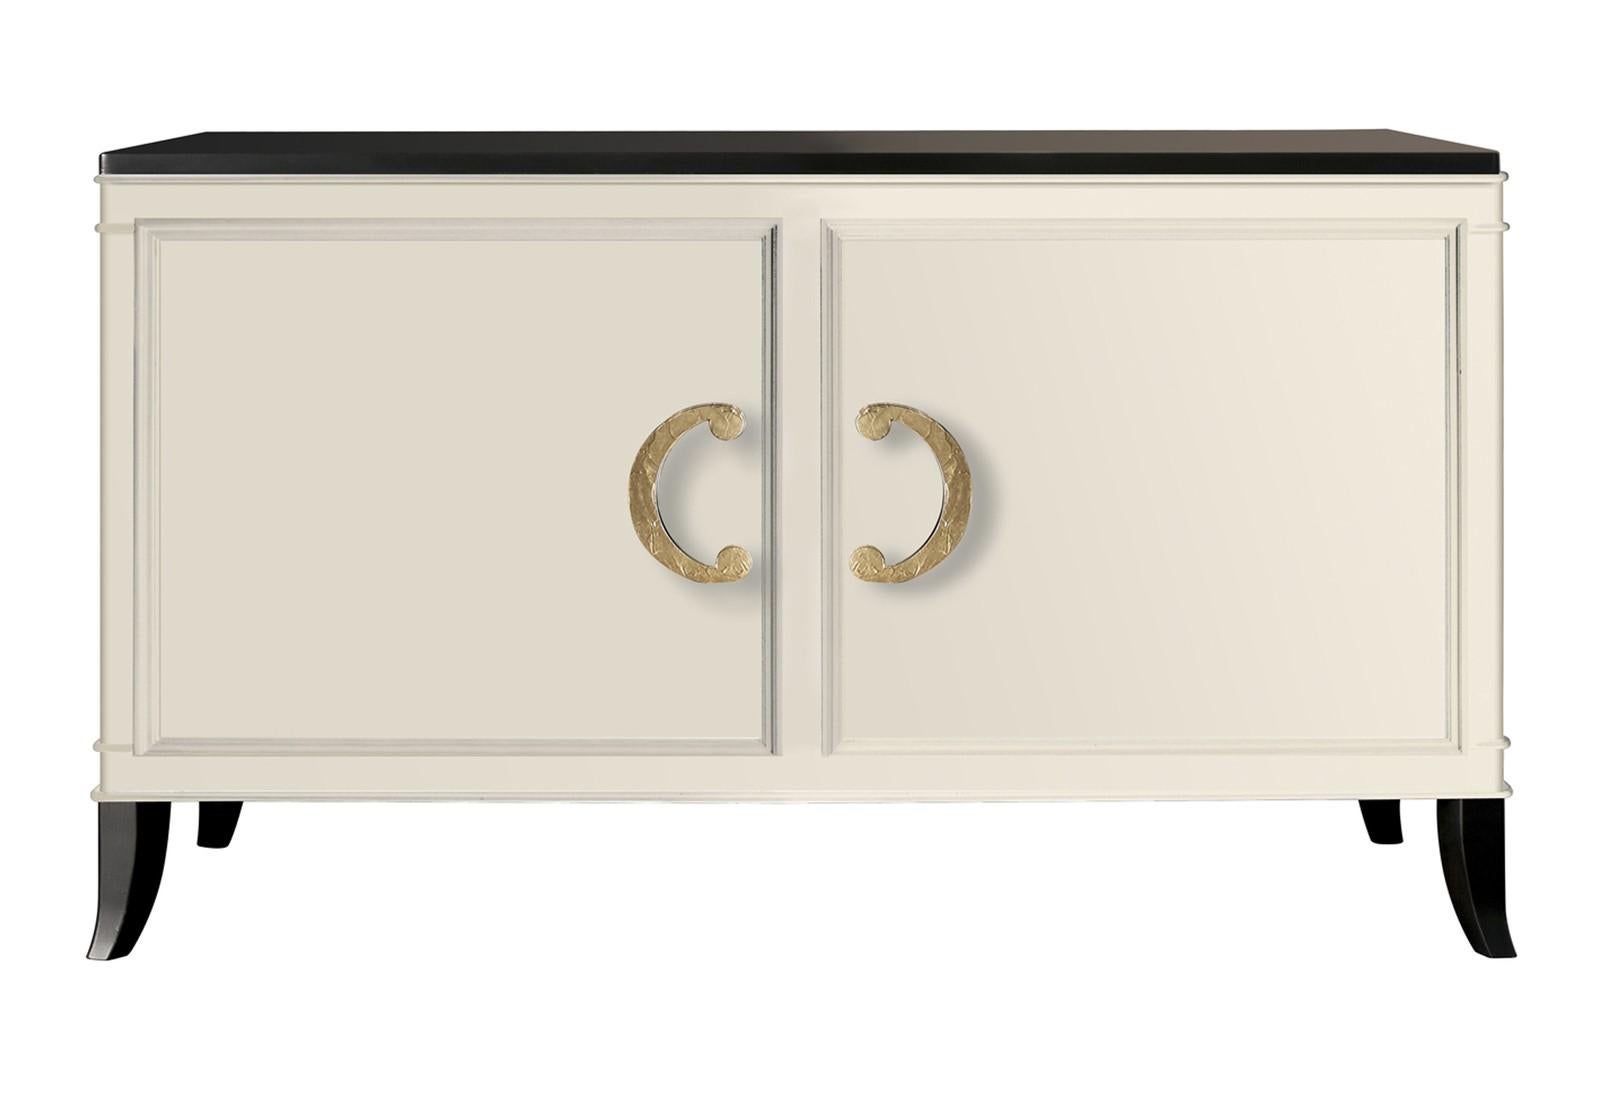 This sophisticated two-door sideboard was crafted entirely by the hands of expert Italian artisans in wood. Its wow metal handles feature a crinkled texture and are available in silver or gold leaf finishes. This piece was inspired by the Art Deco